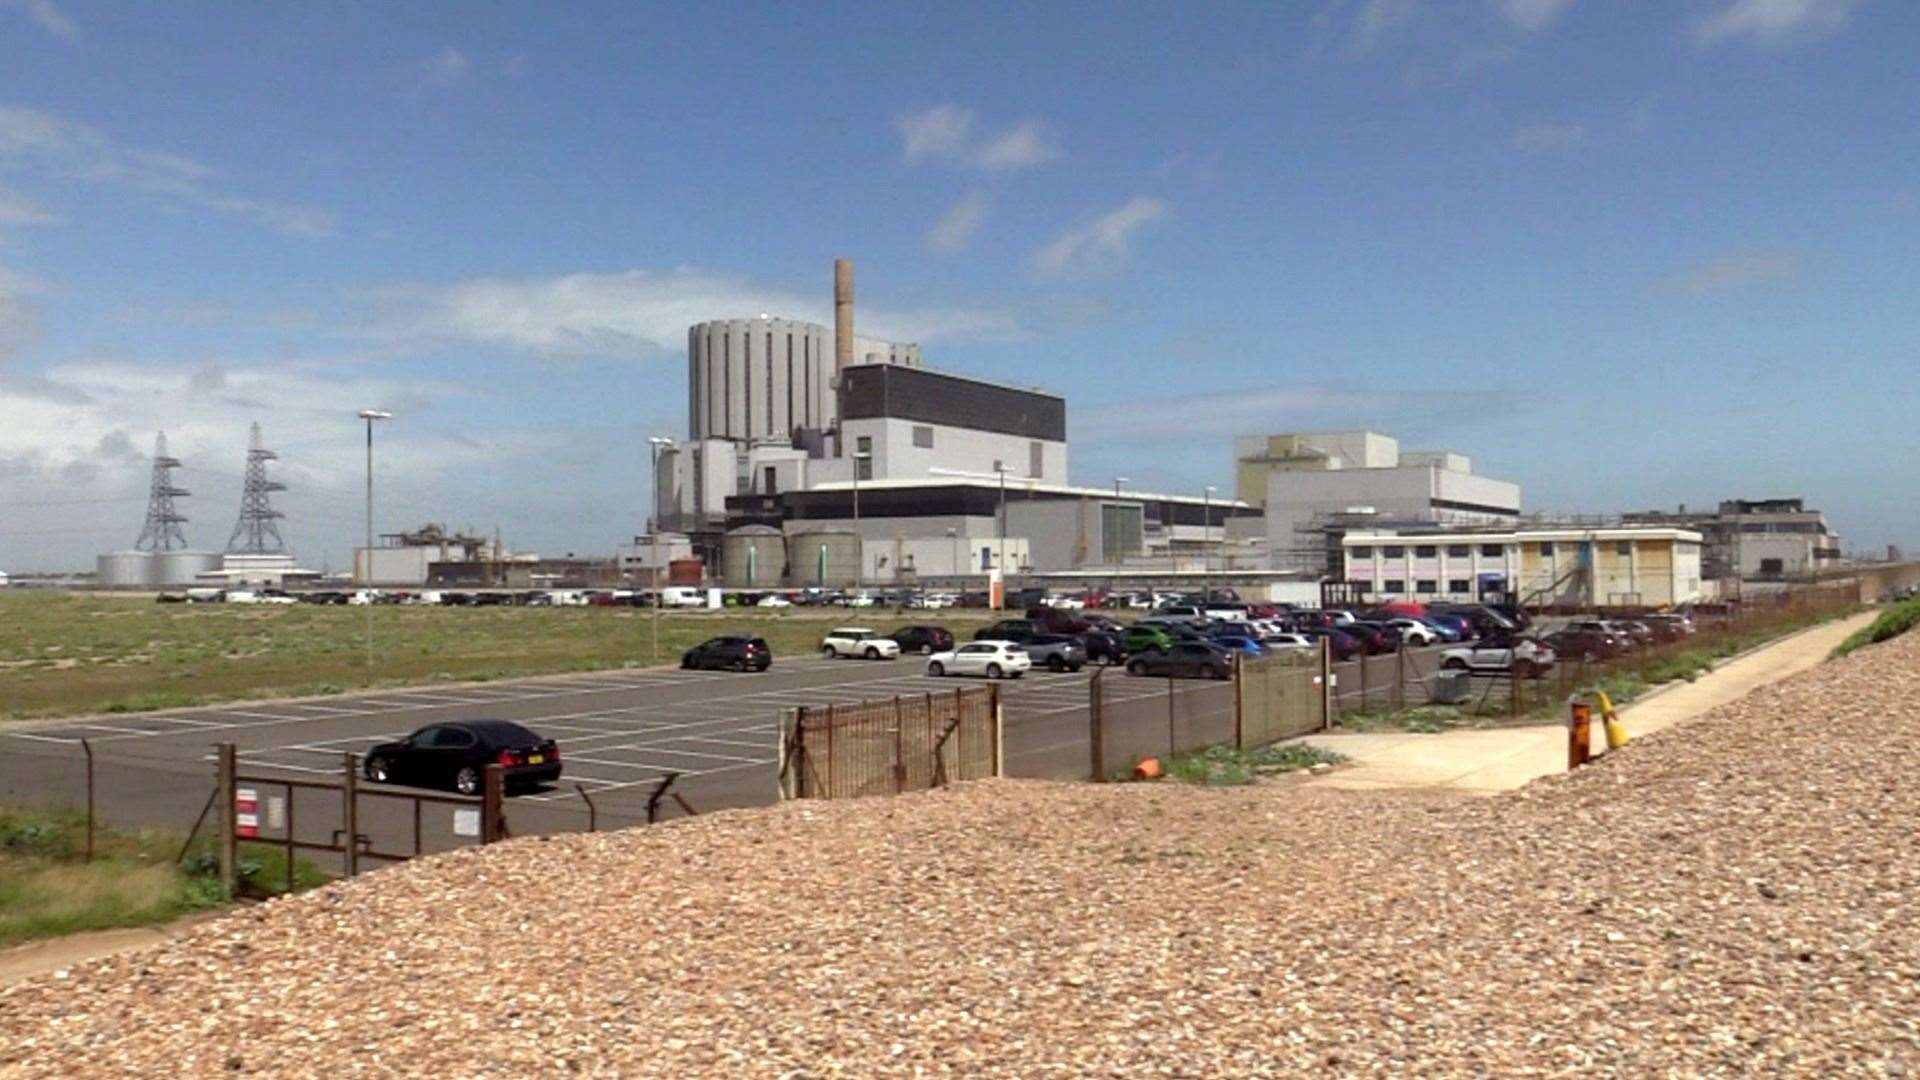 Dungeness B power station